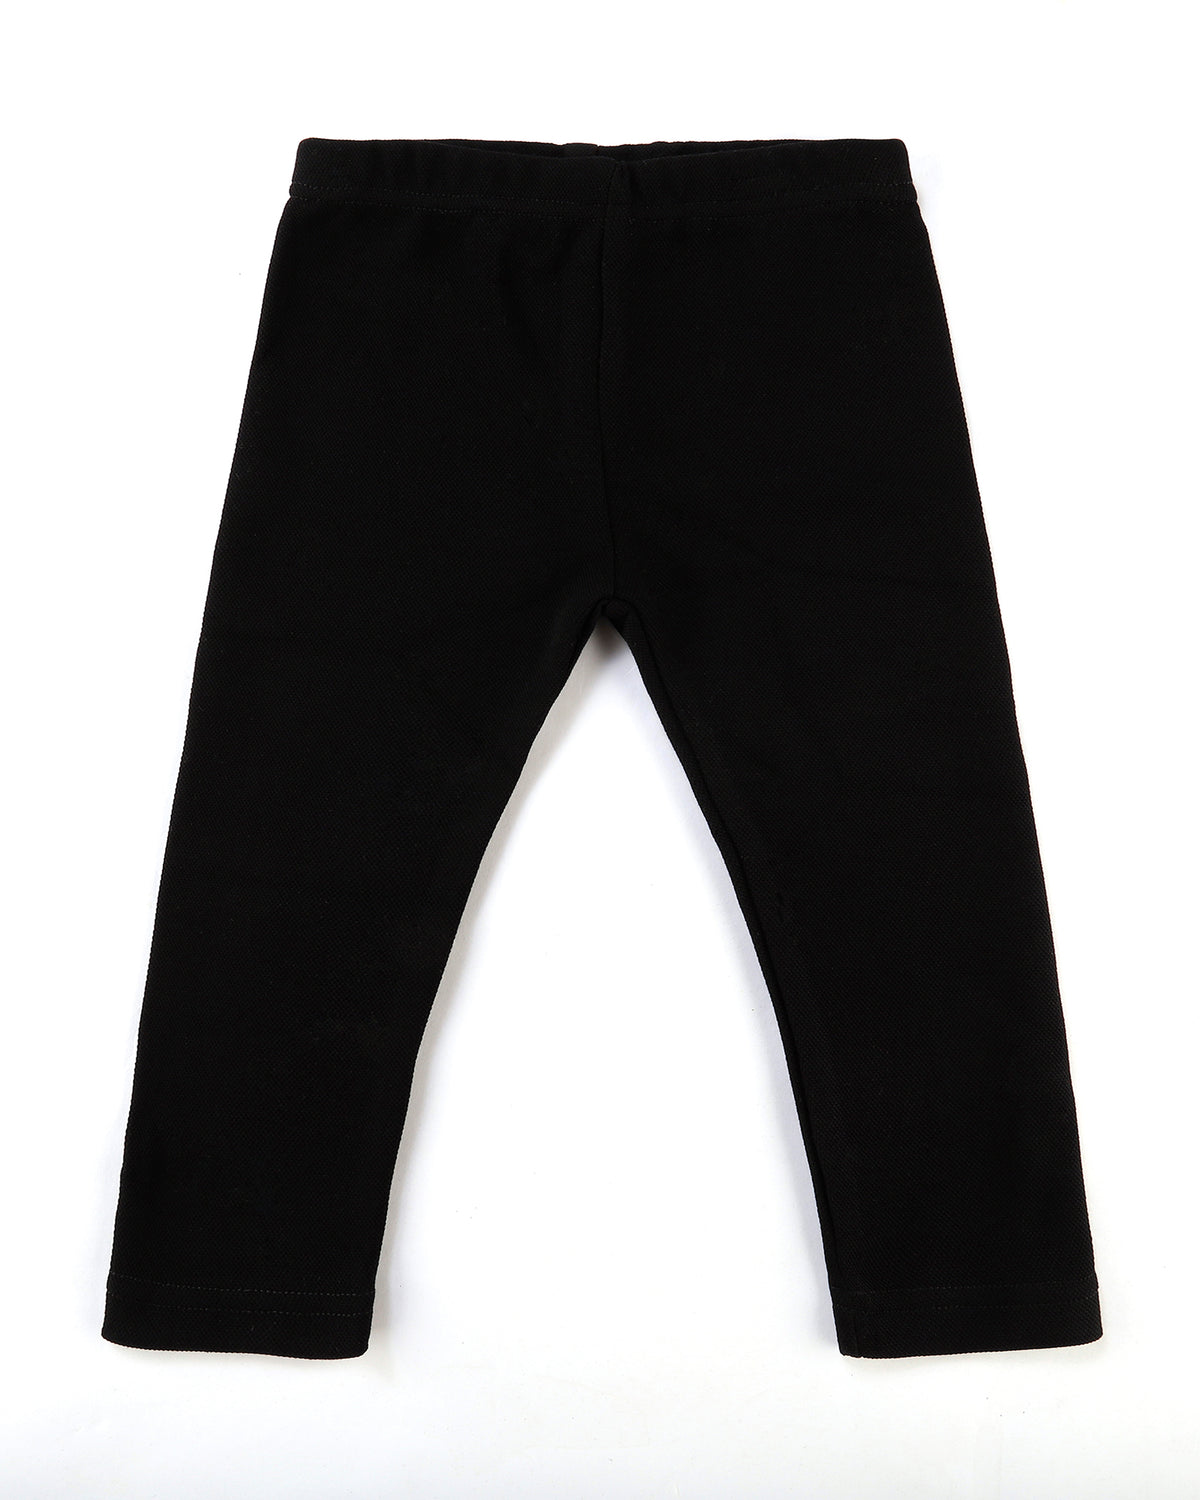 Here to stay Leggings in Black Front